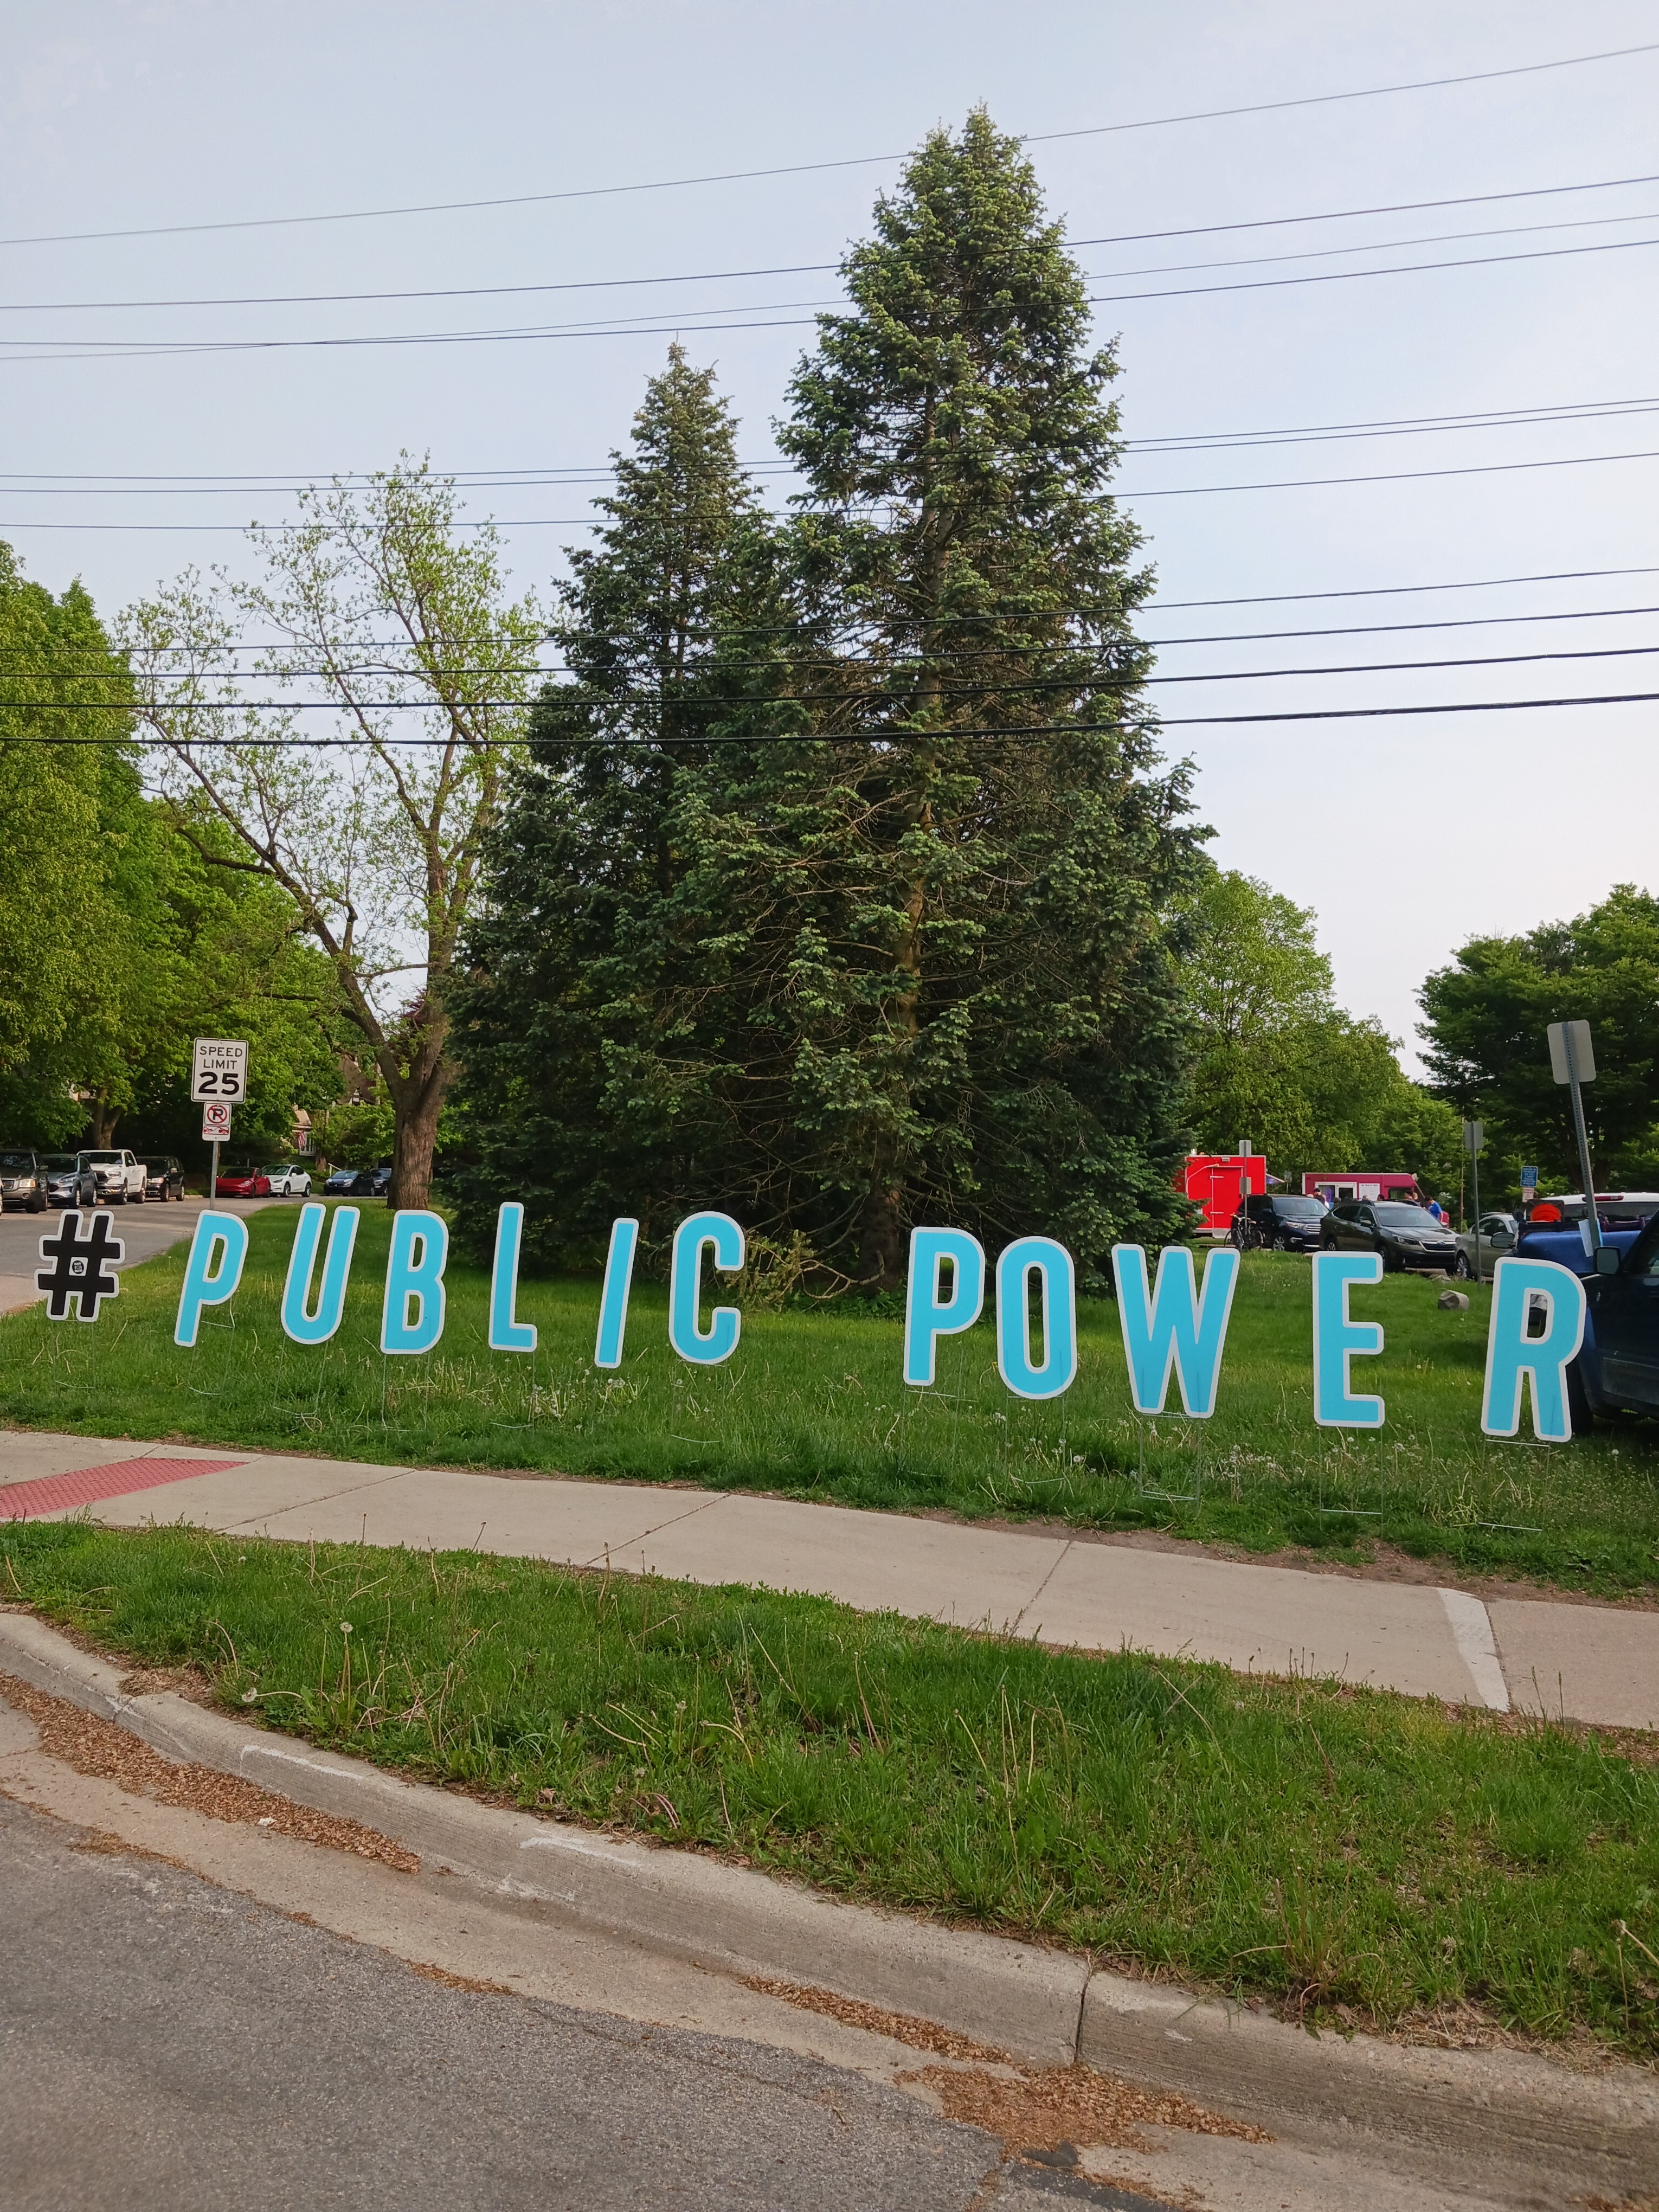 Large cut out letters spelling #PUBLICPOWER on grass outside Ann Arbor for Public Power rally, Burns Park 2023